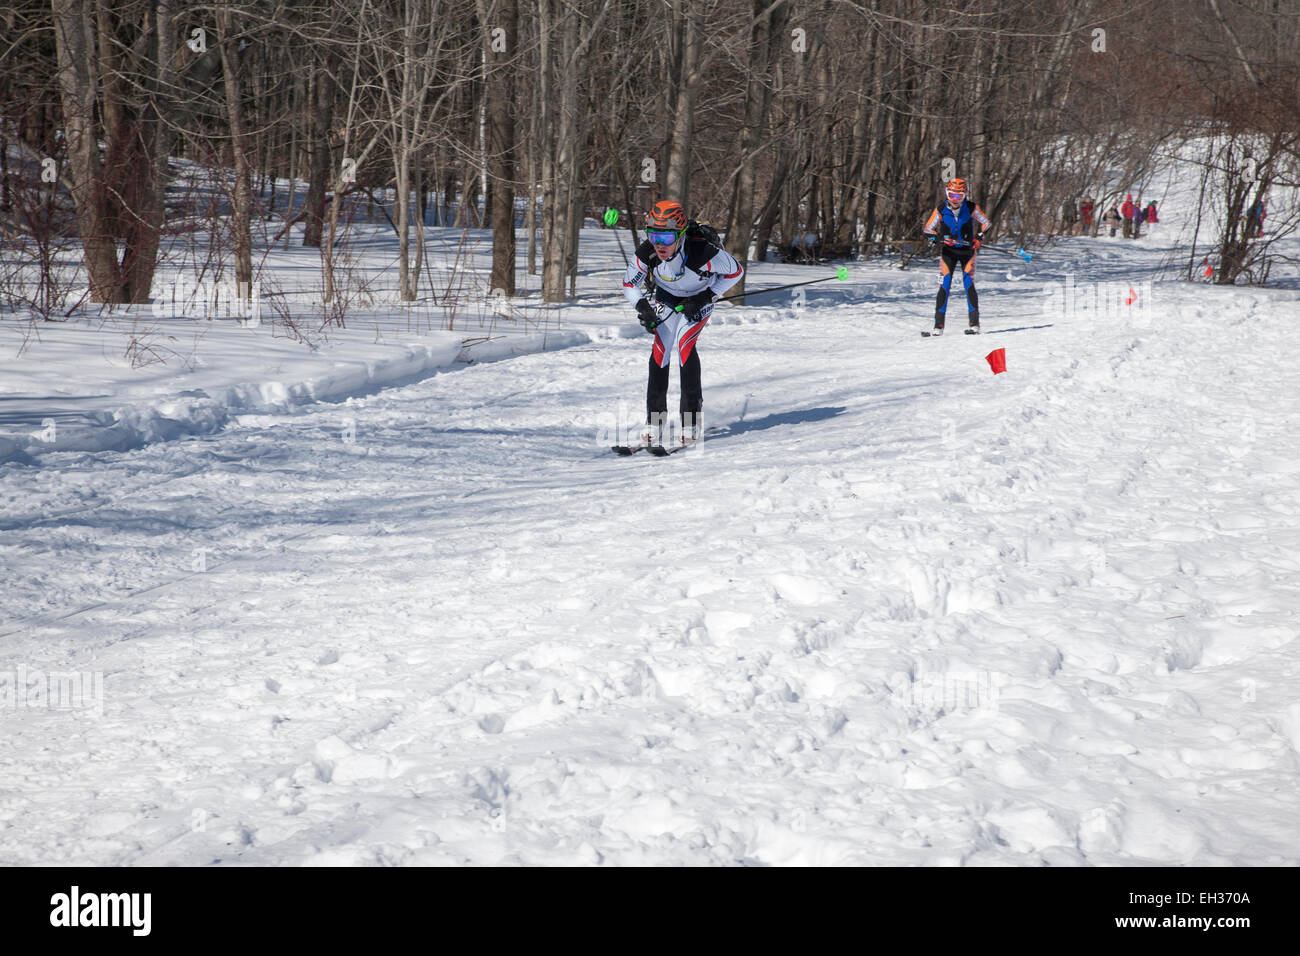 Skiers approach the halfway point at the Thunderbolt Ski Race in March 2015 on Mount Greylock, Adams, MA. Stock Photo